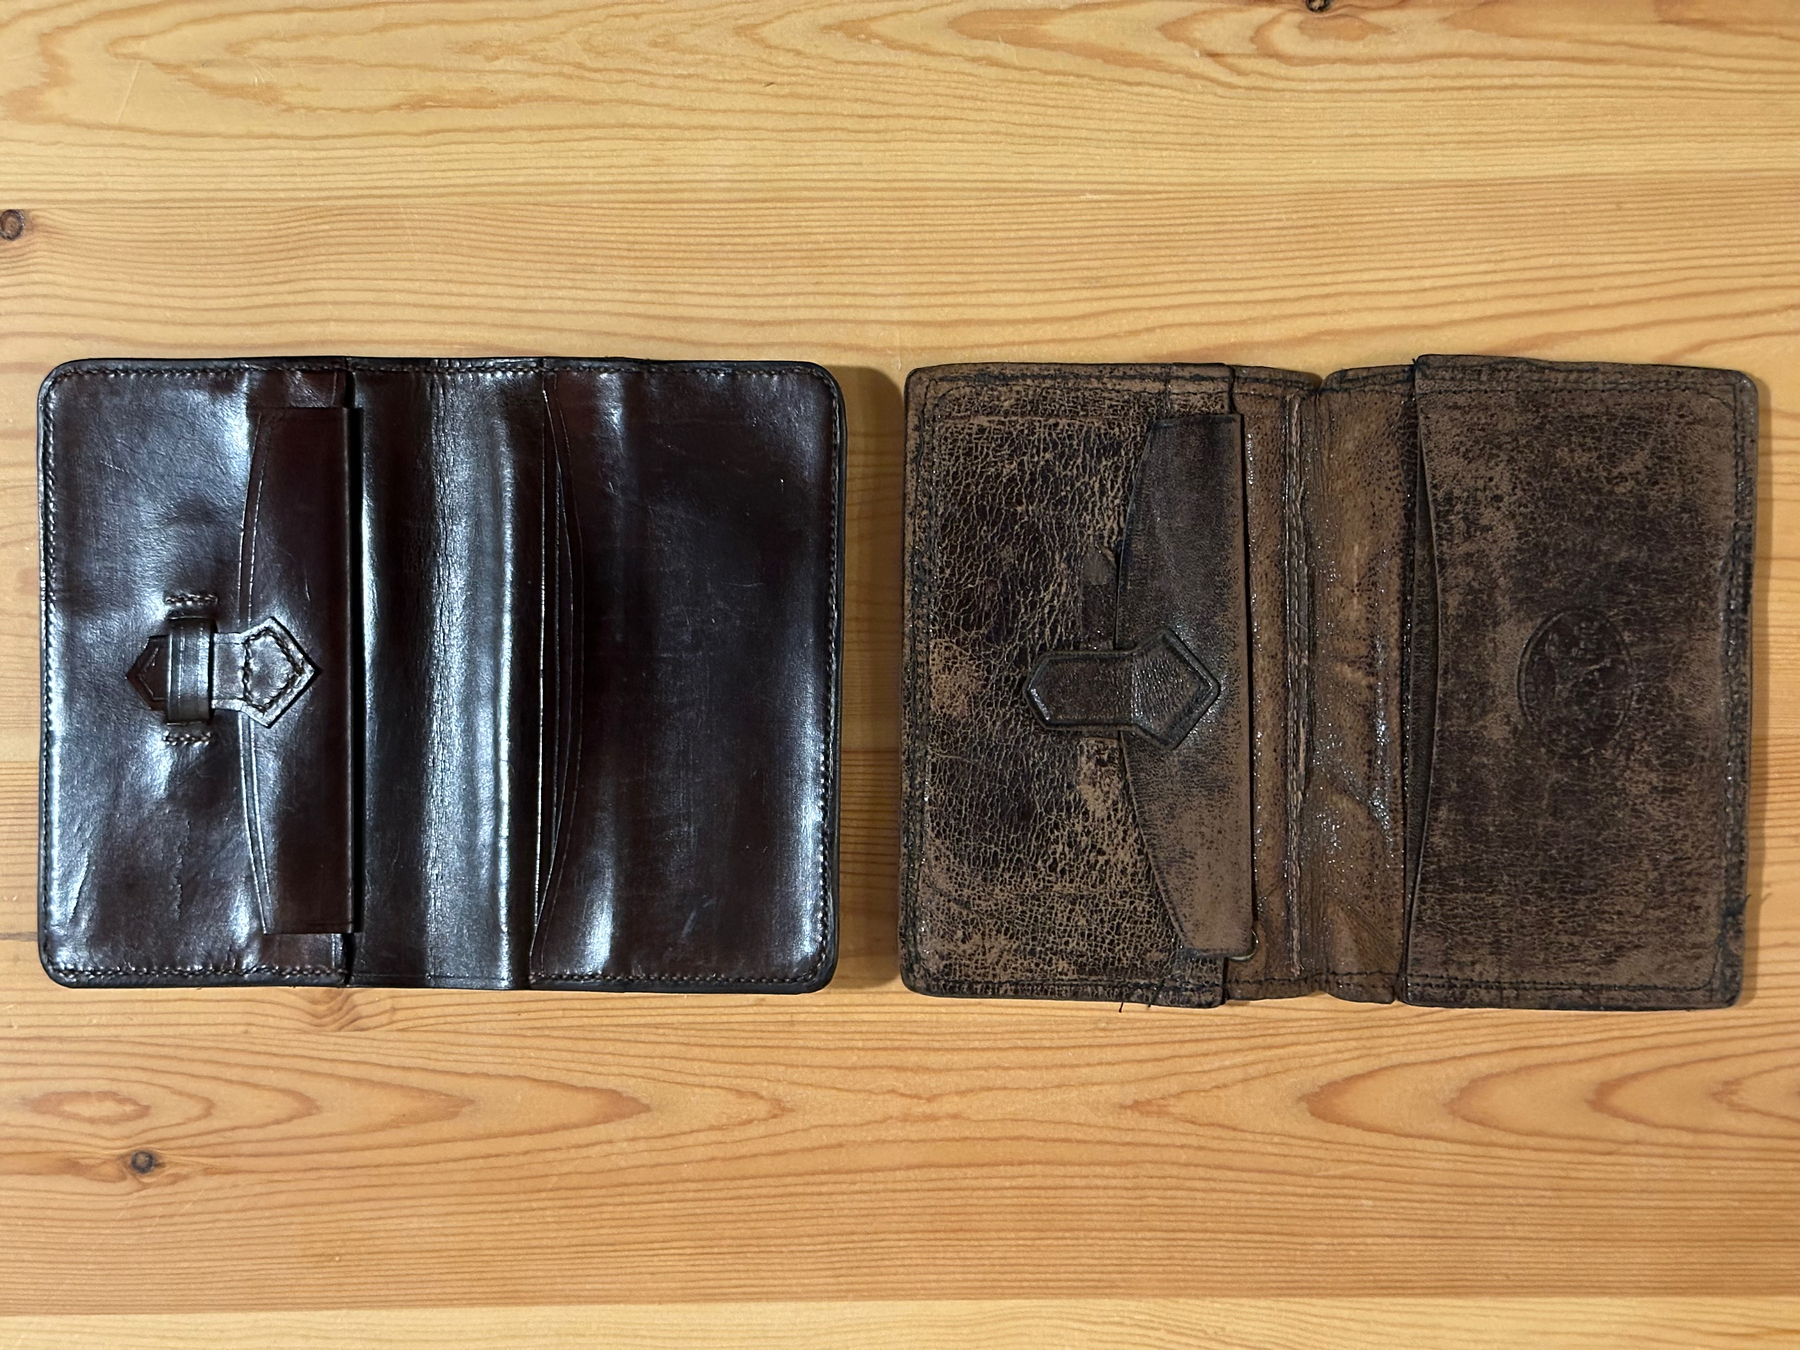 Original leather wallet and replica side by side on a table, shown open